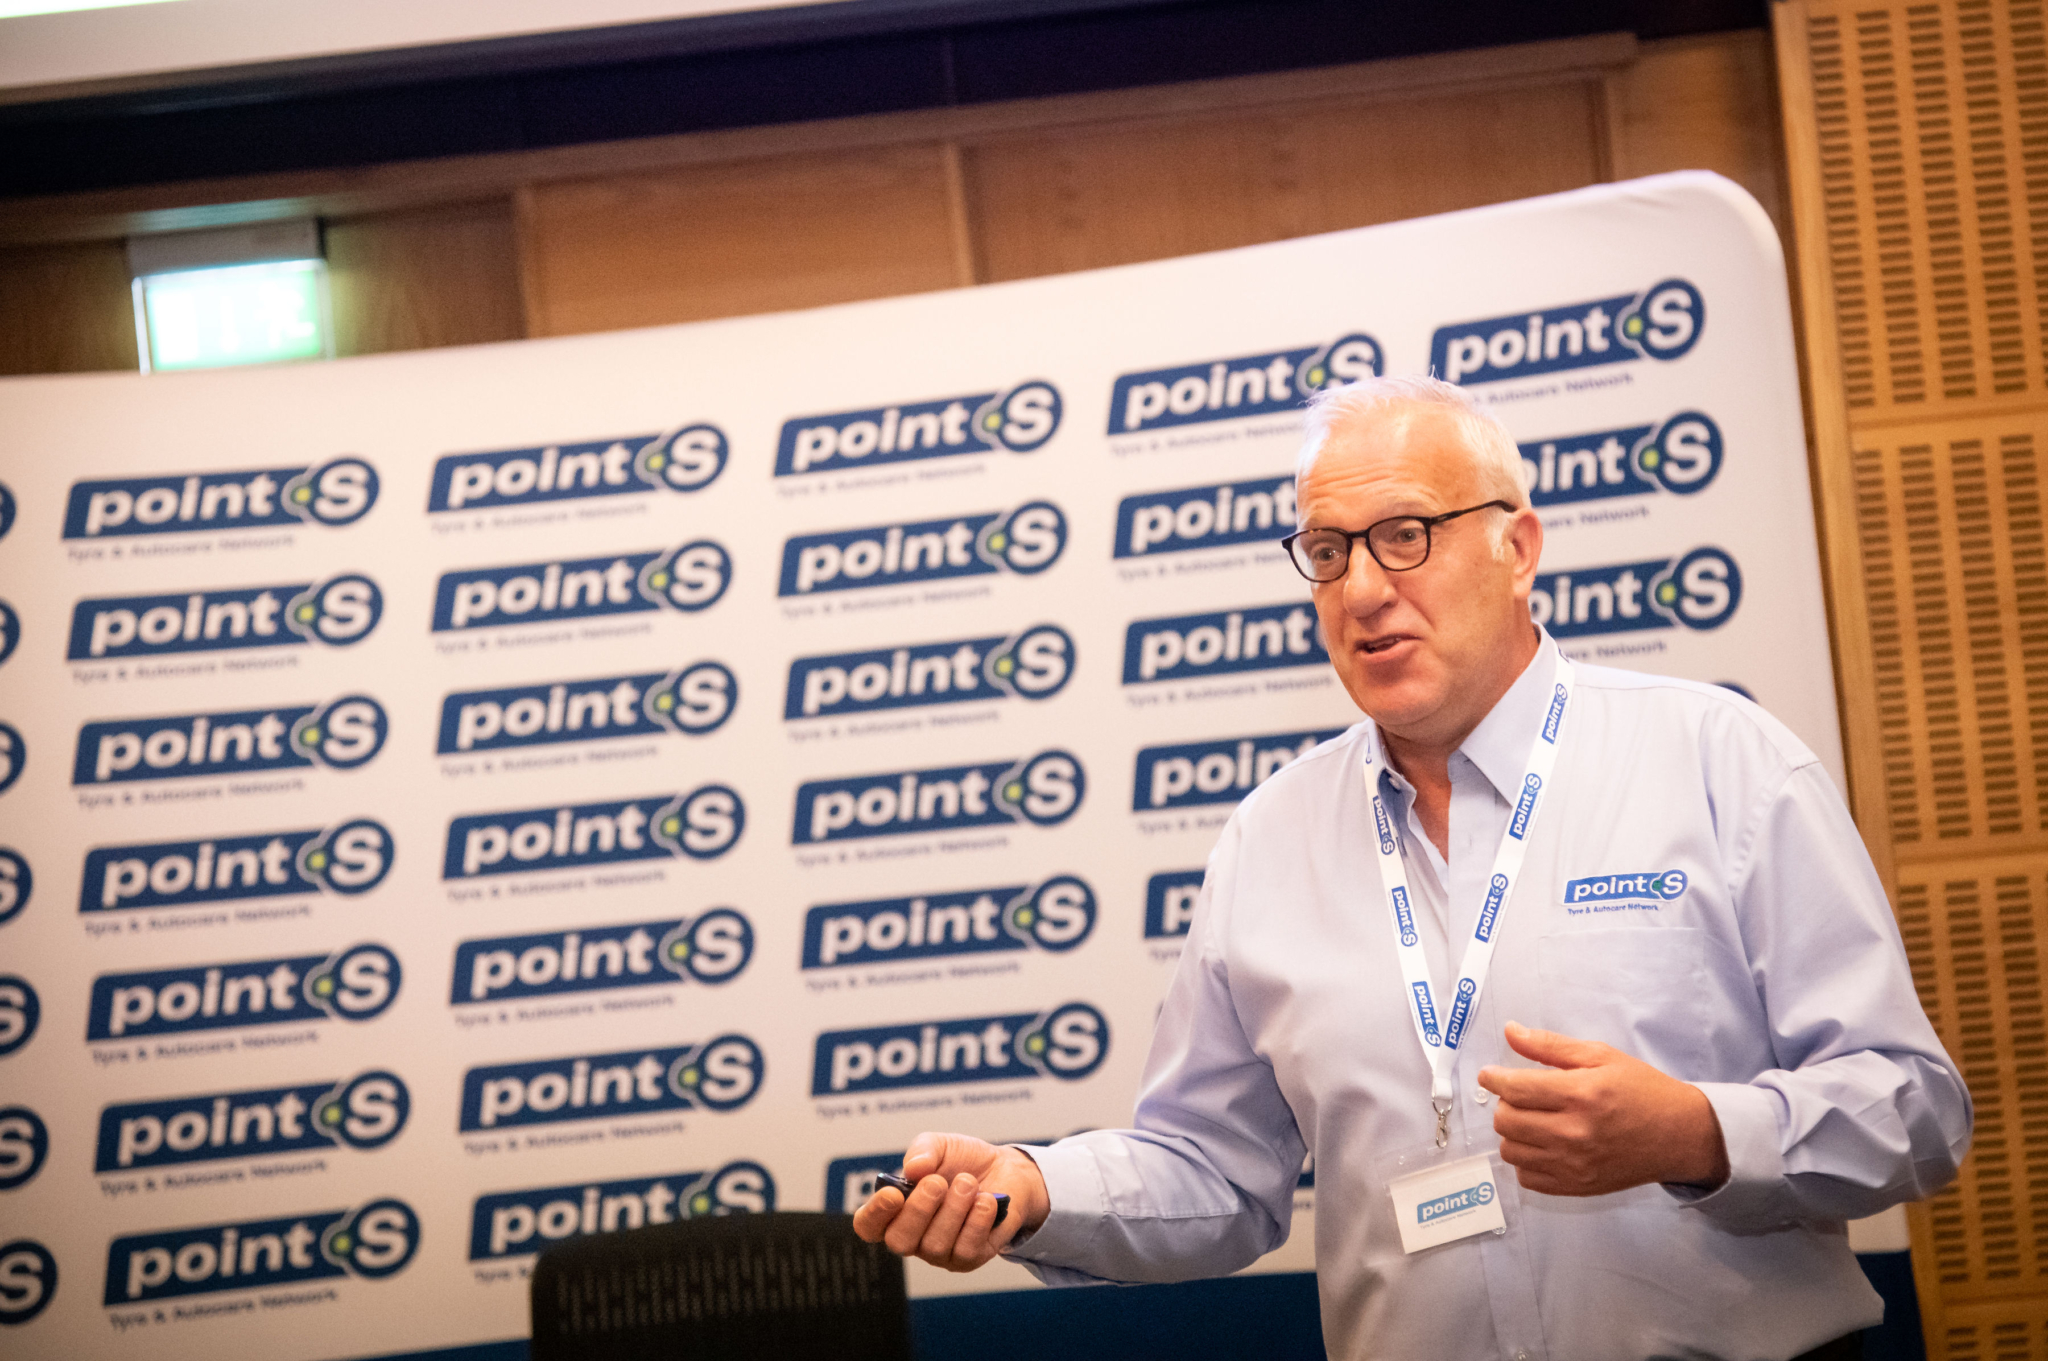 Point S aims to ‘level the playing field’